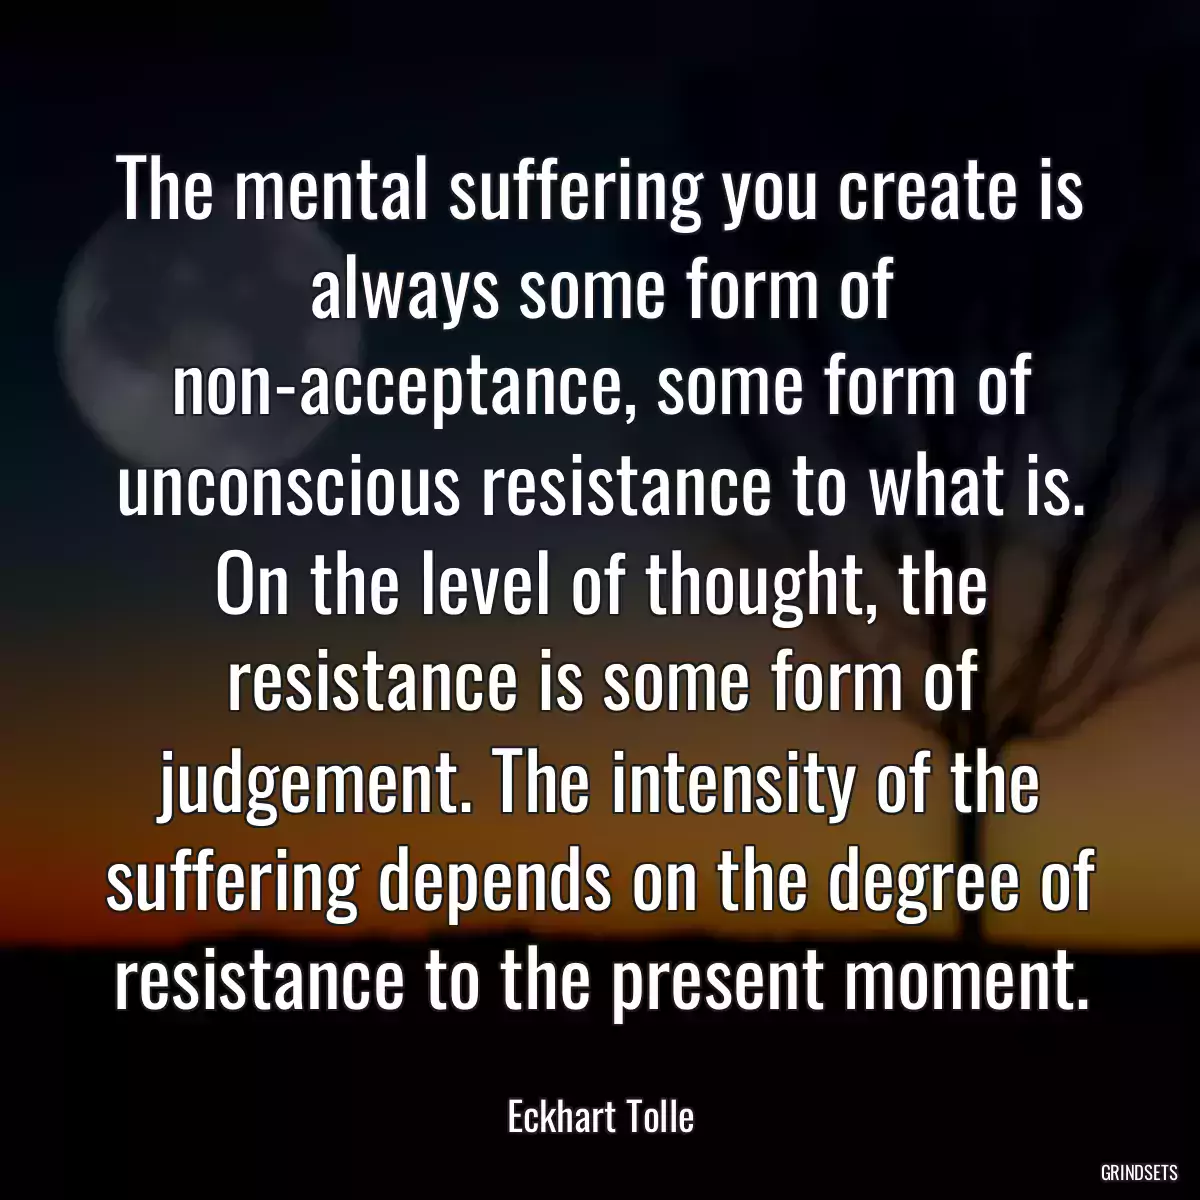 The mental suffering you create is always some form of non-acceptance, some form of unconscious resistance to what is. On the level of thought, the resistance is some form of judgement. The intensity of the suffering depends on the degree of resistance to the present moment.